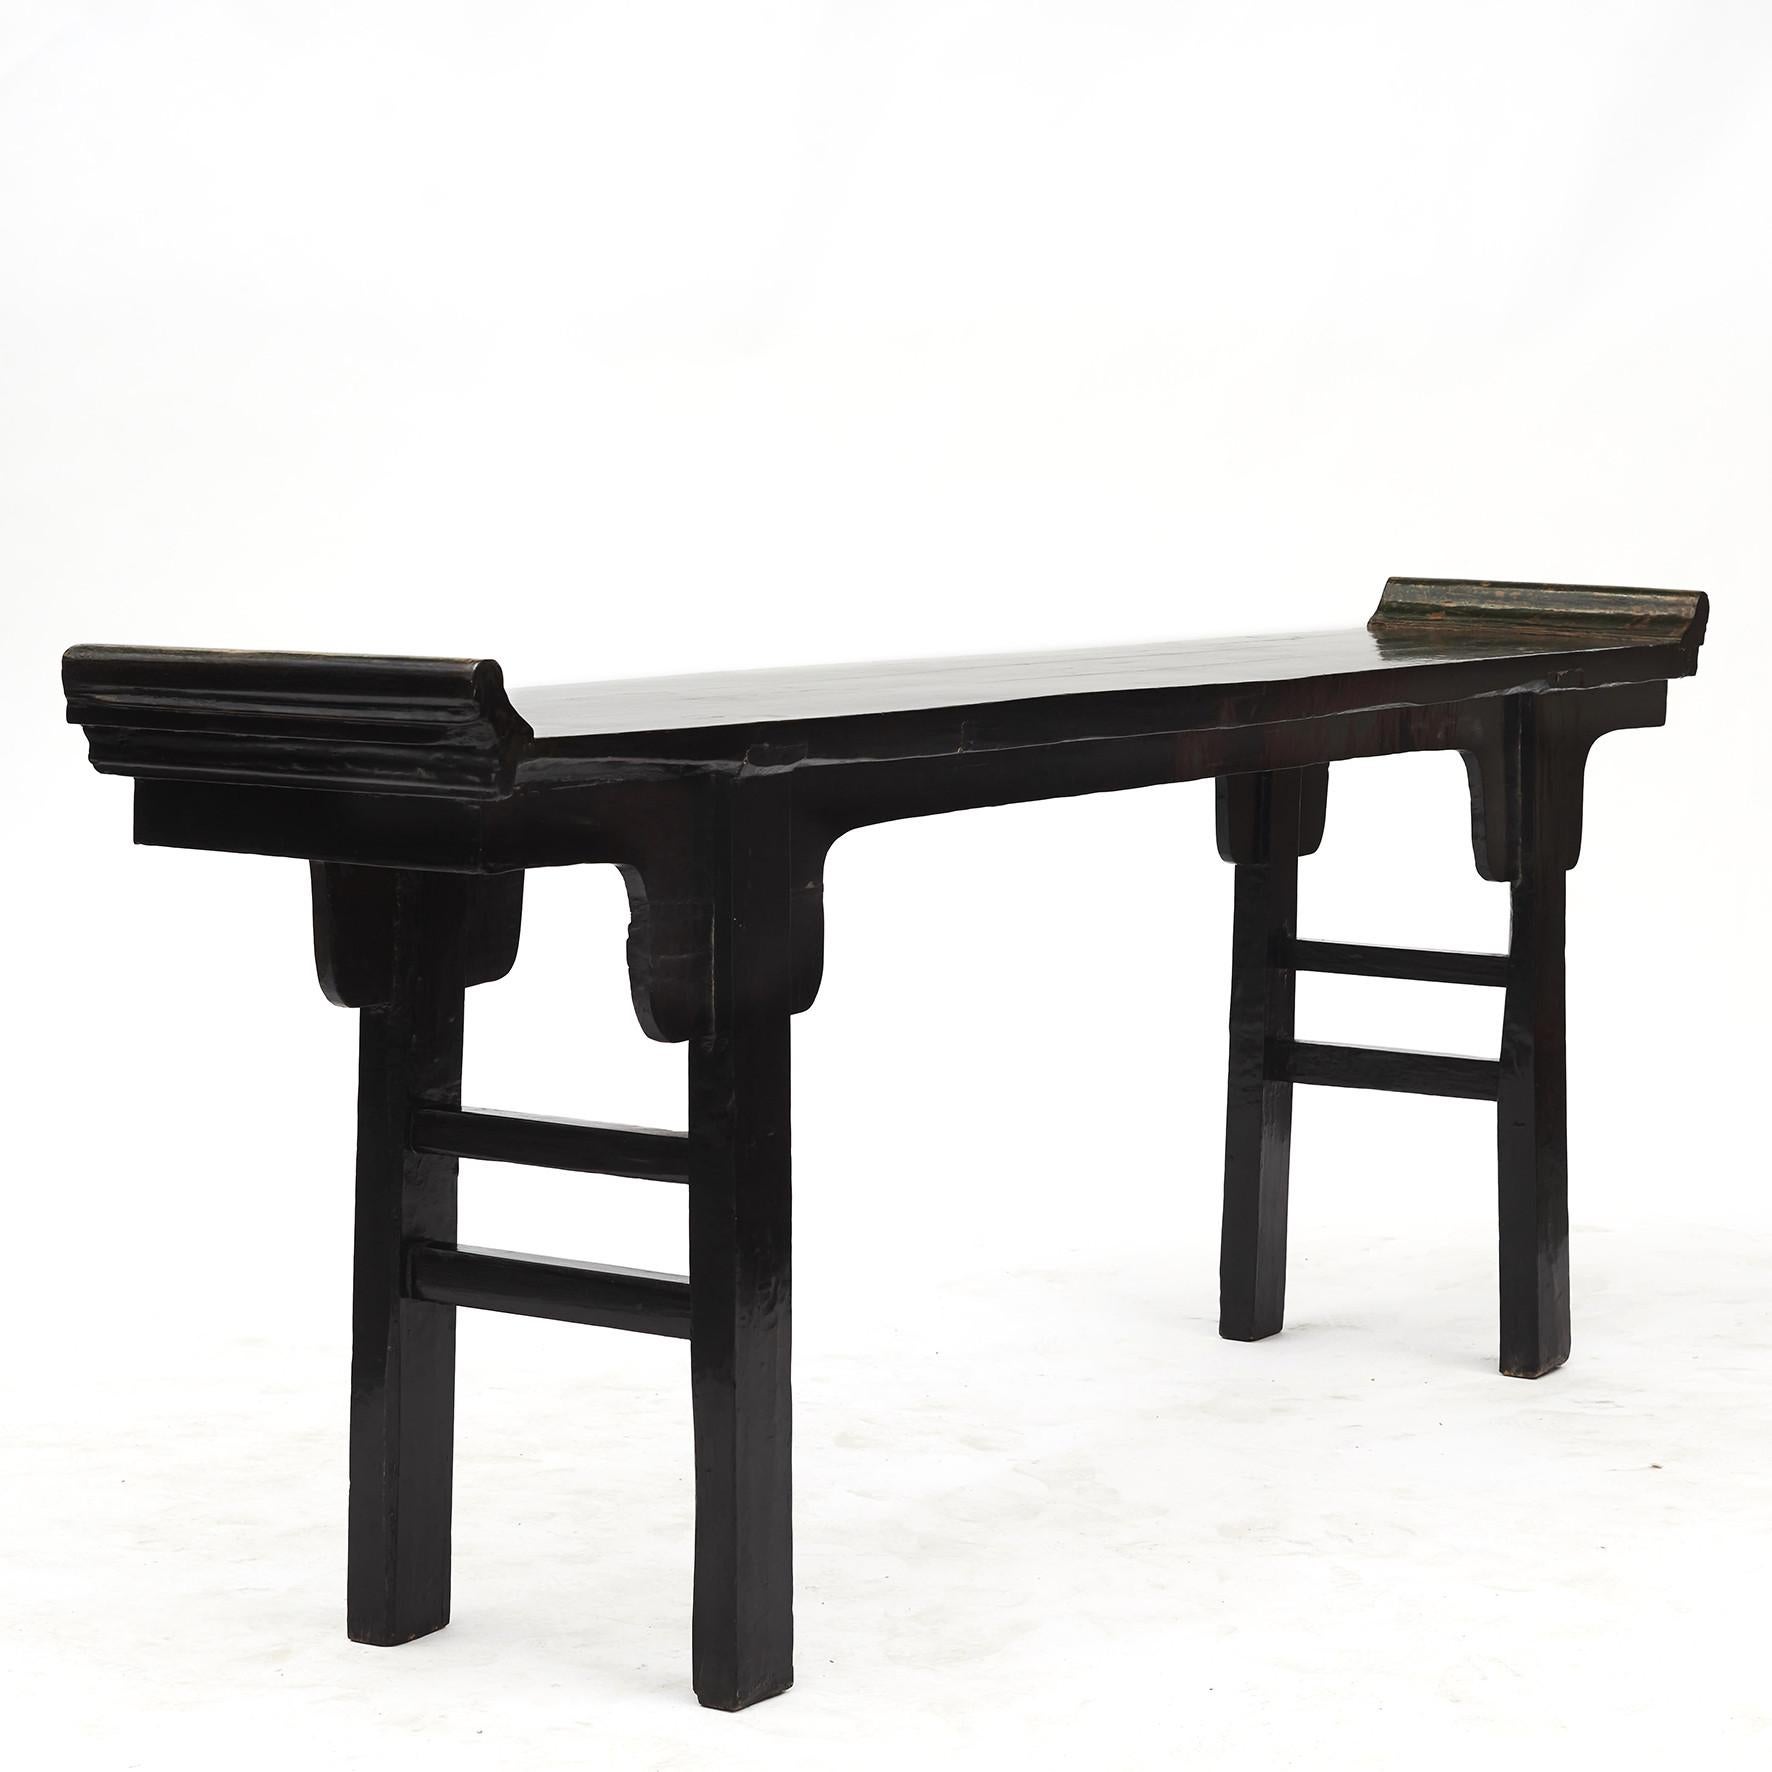 Black & Green Lacquer Consol Table, Shandong, 1830-1840 For Sale 4